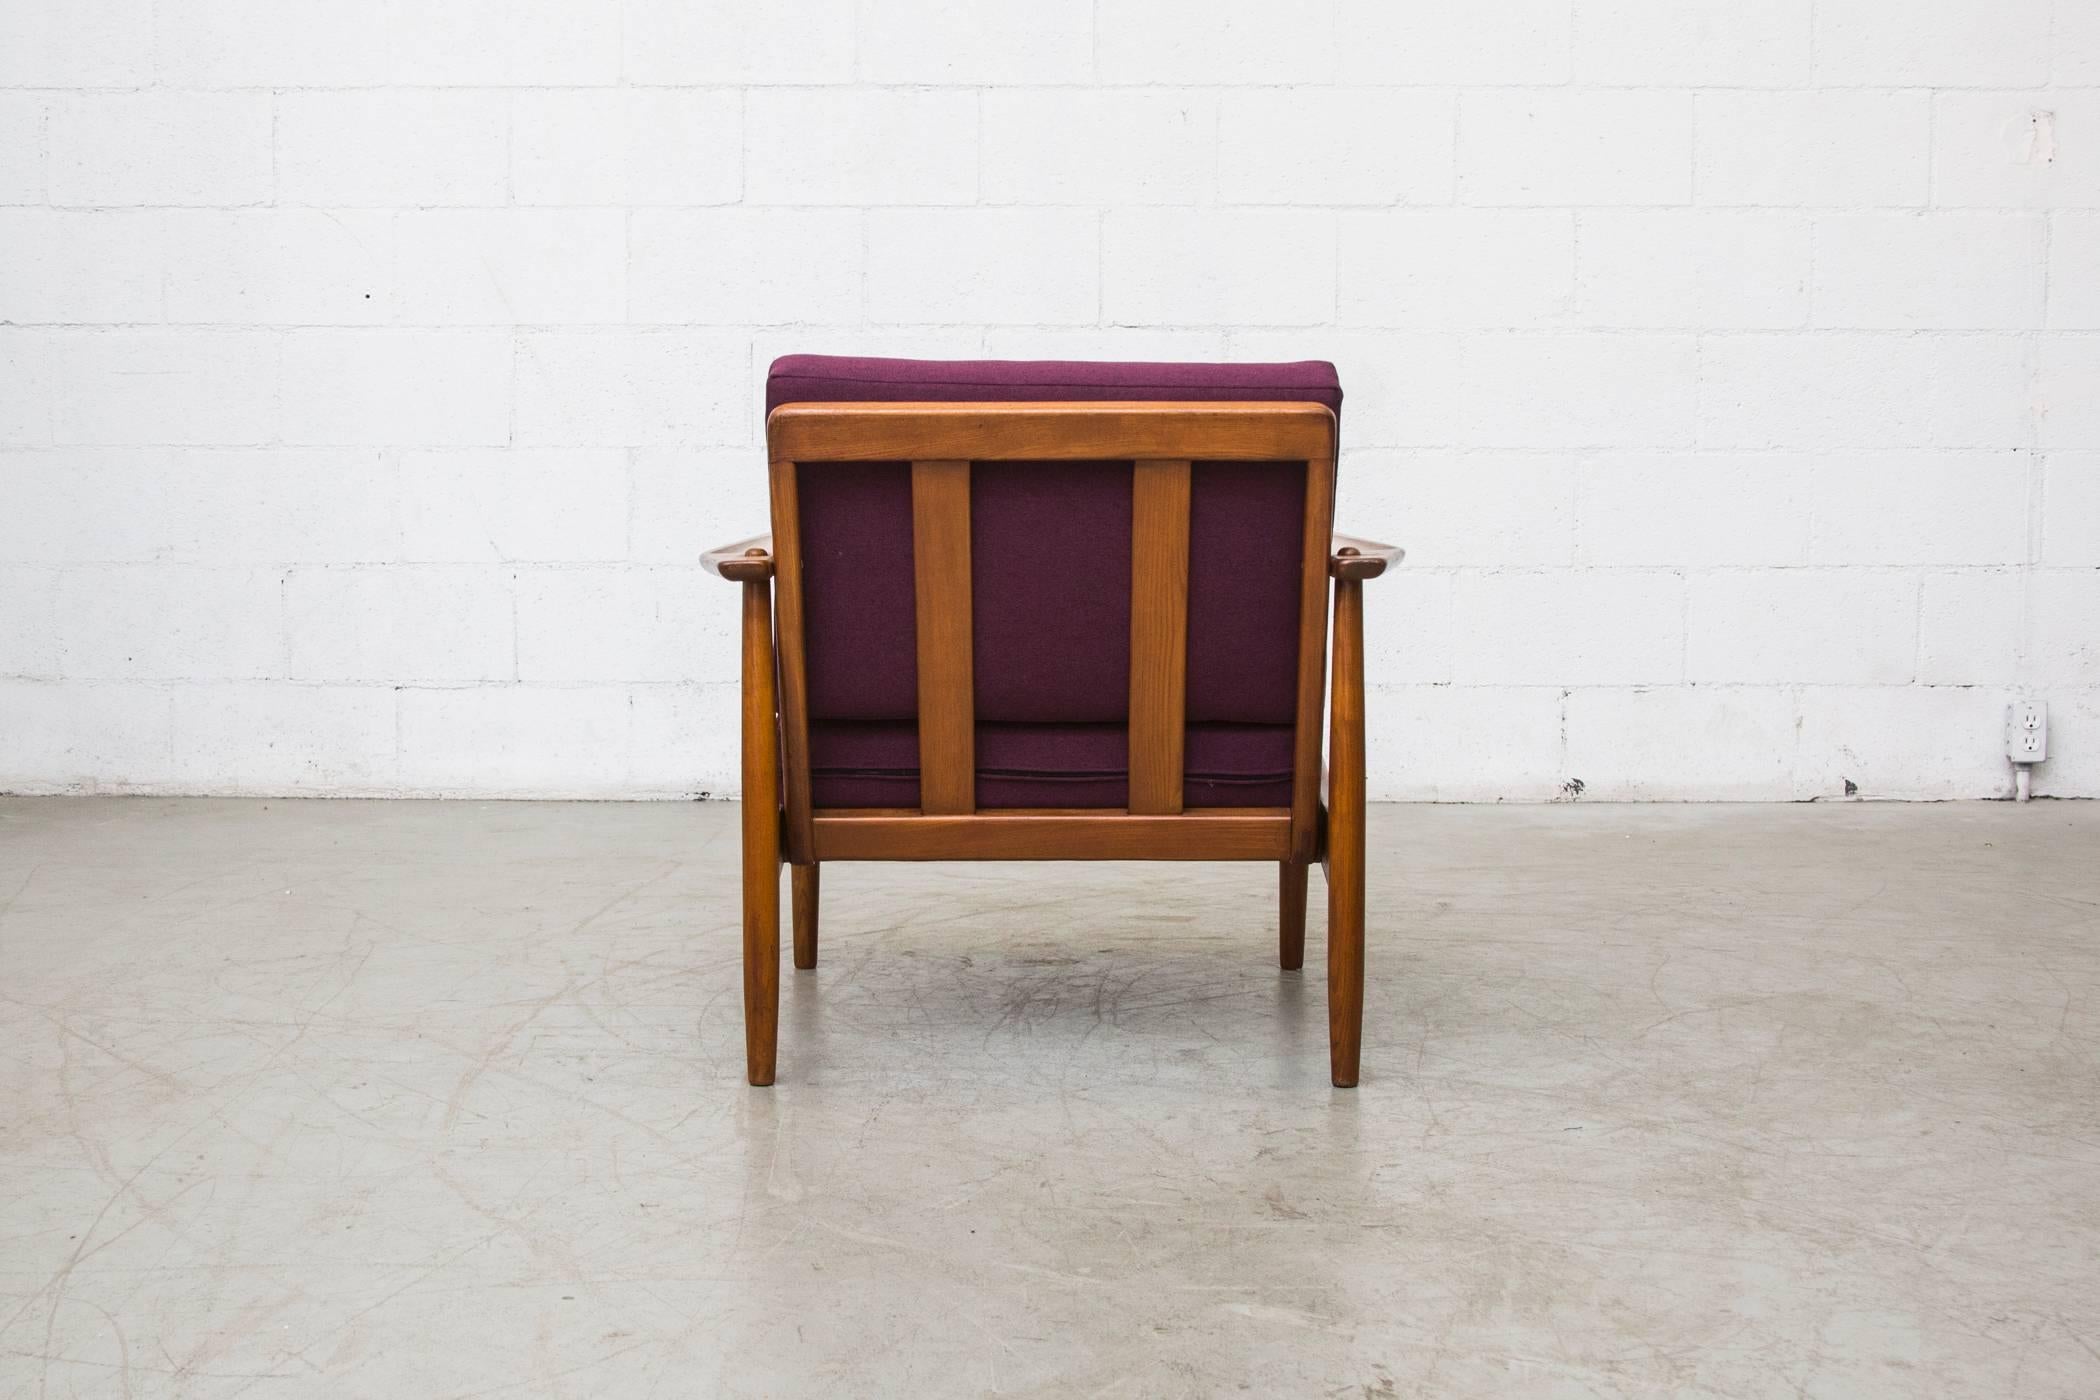 Mid-20th Century Mid-Century Modern Lounge Chair in Grape with Slat Back